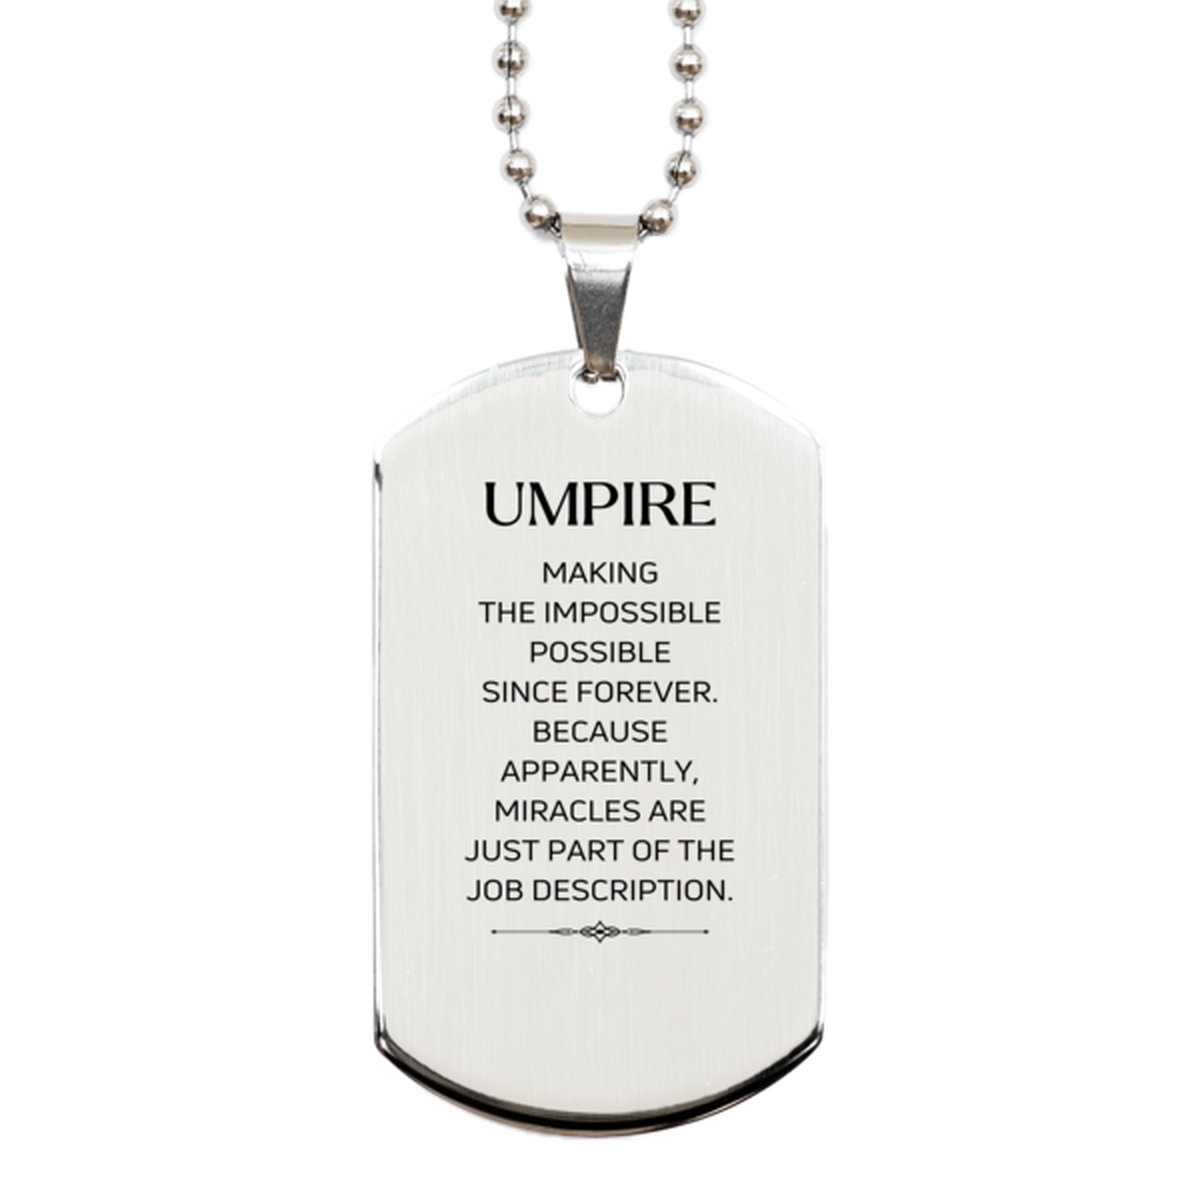 Funny Umpire Gifts, Miracles are just part of the job description, Inspirational Birthday Silver Dog Tag For Umpire, Men, Women, Coworkers, Friends, Boss